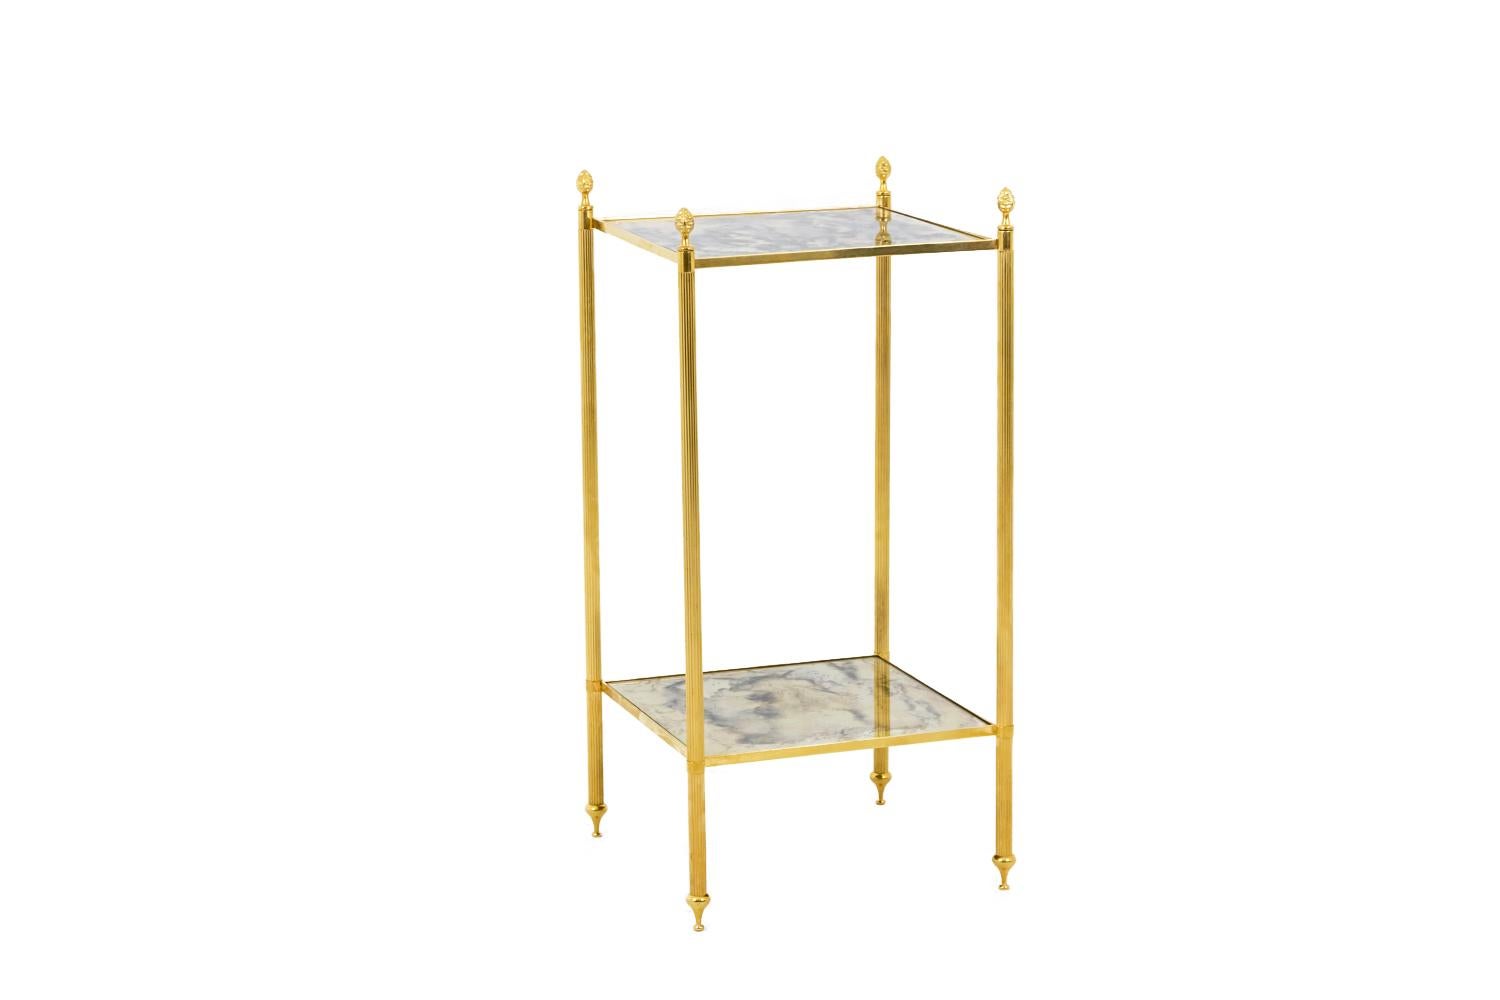 French Maison Jansen, Pair of End Tables in Gilt Brass and Oxidized Mirror, 1960s